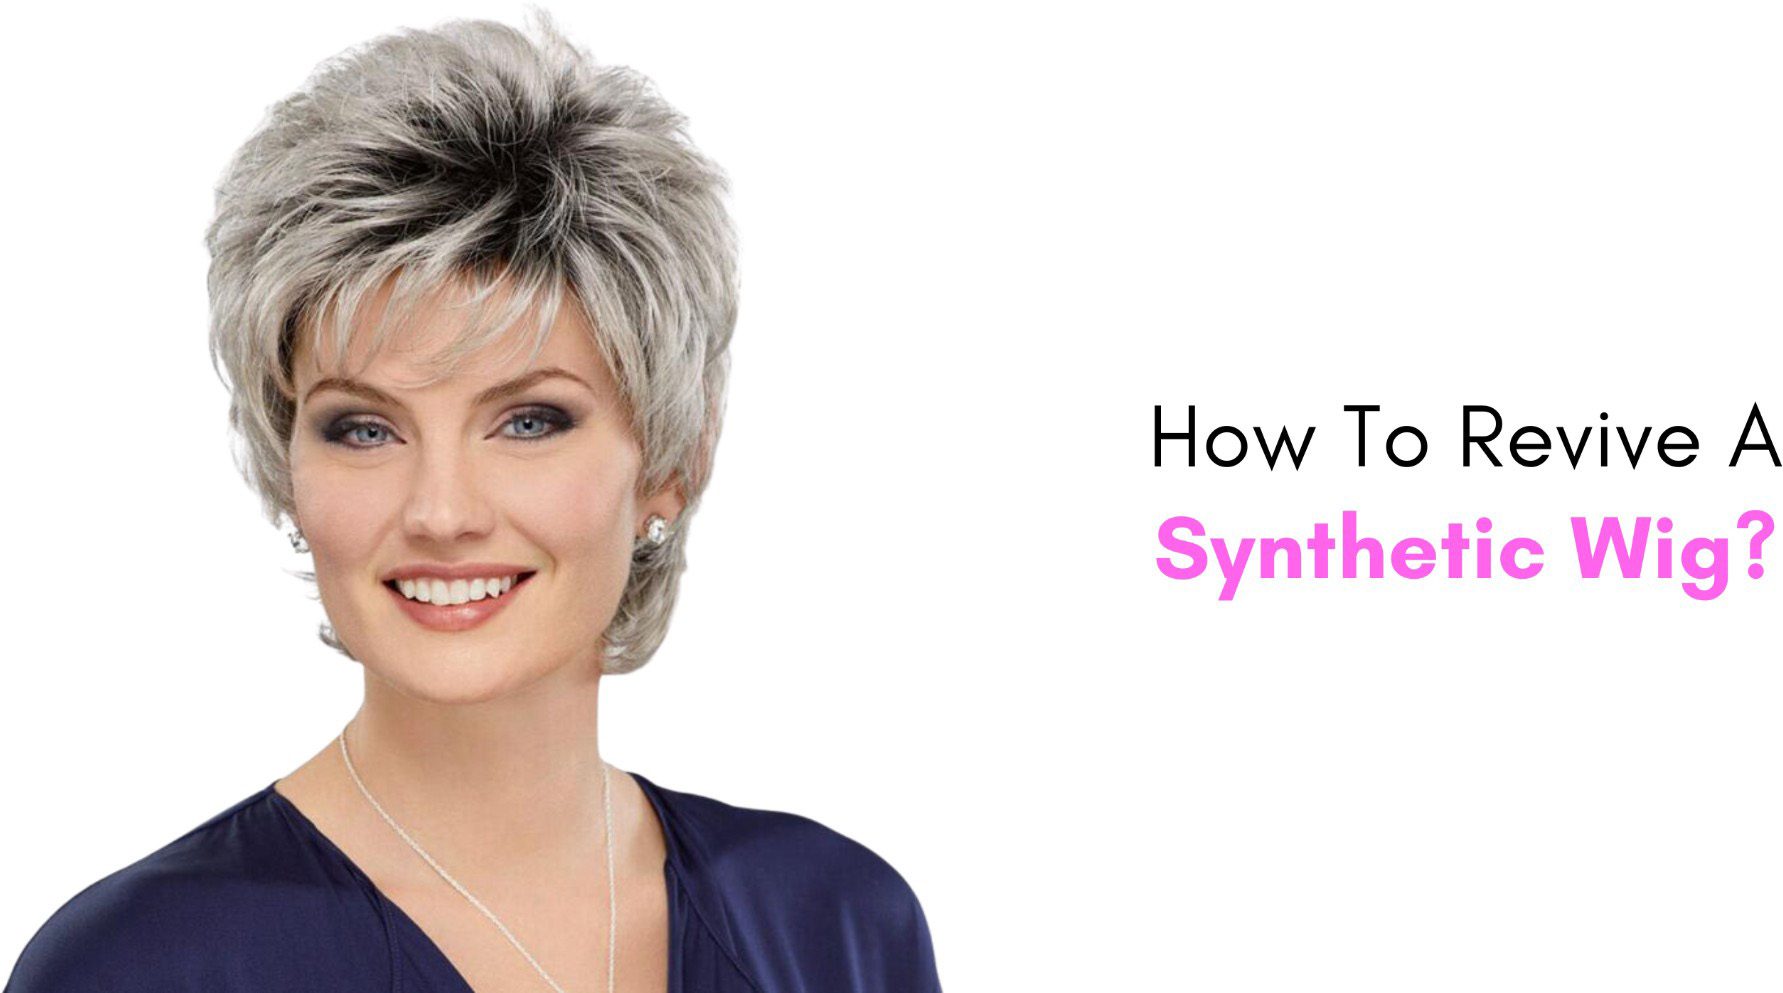 How To Revive A Synthetic Wig?